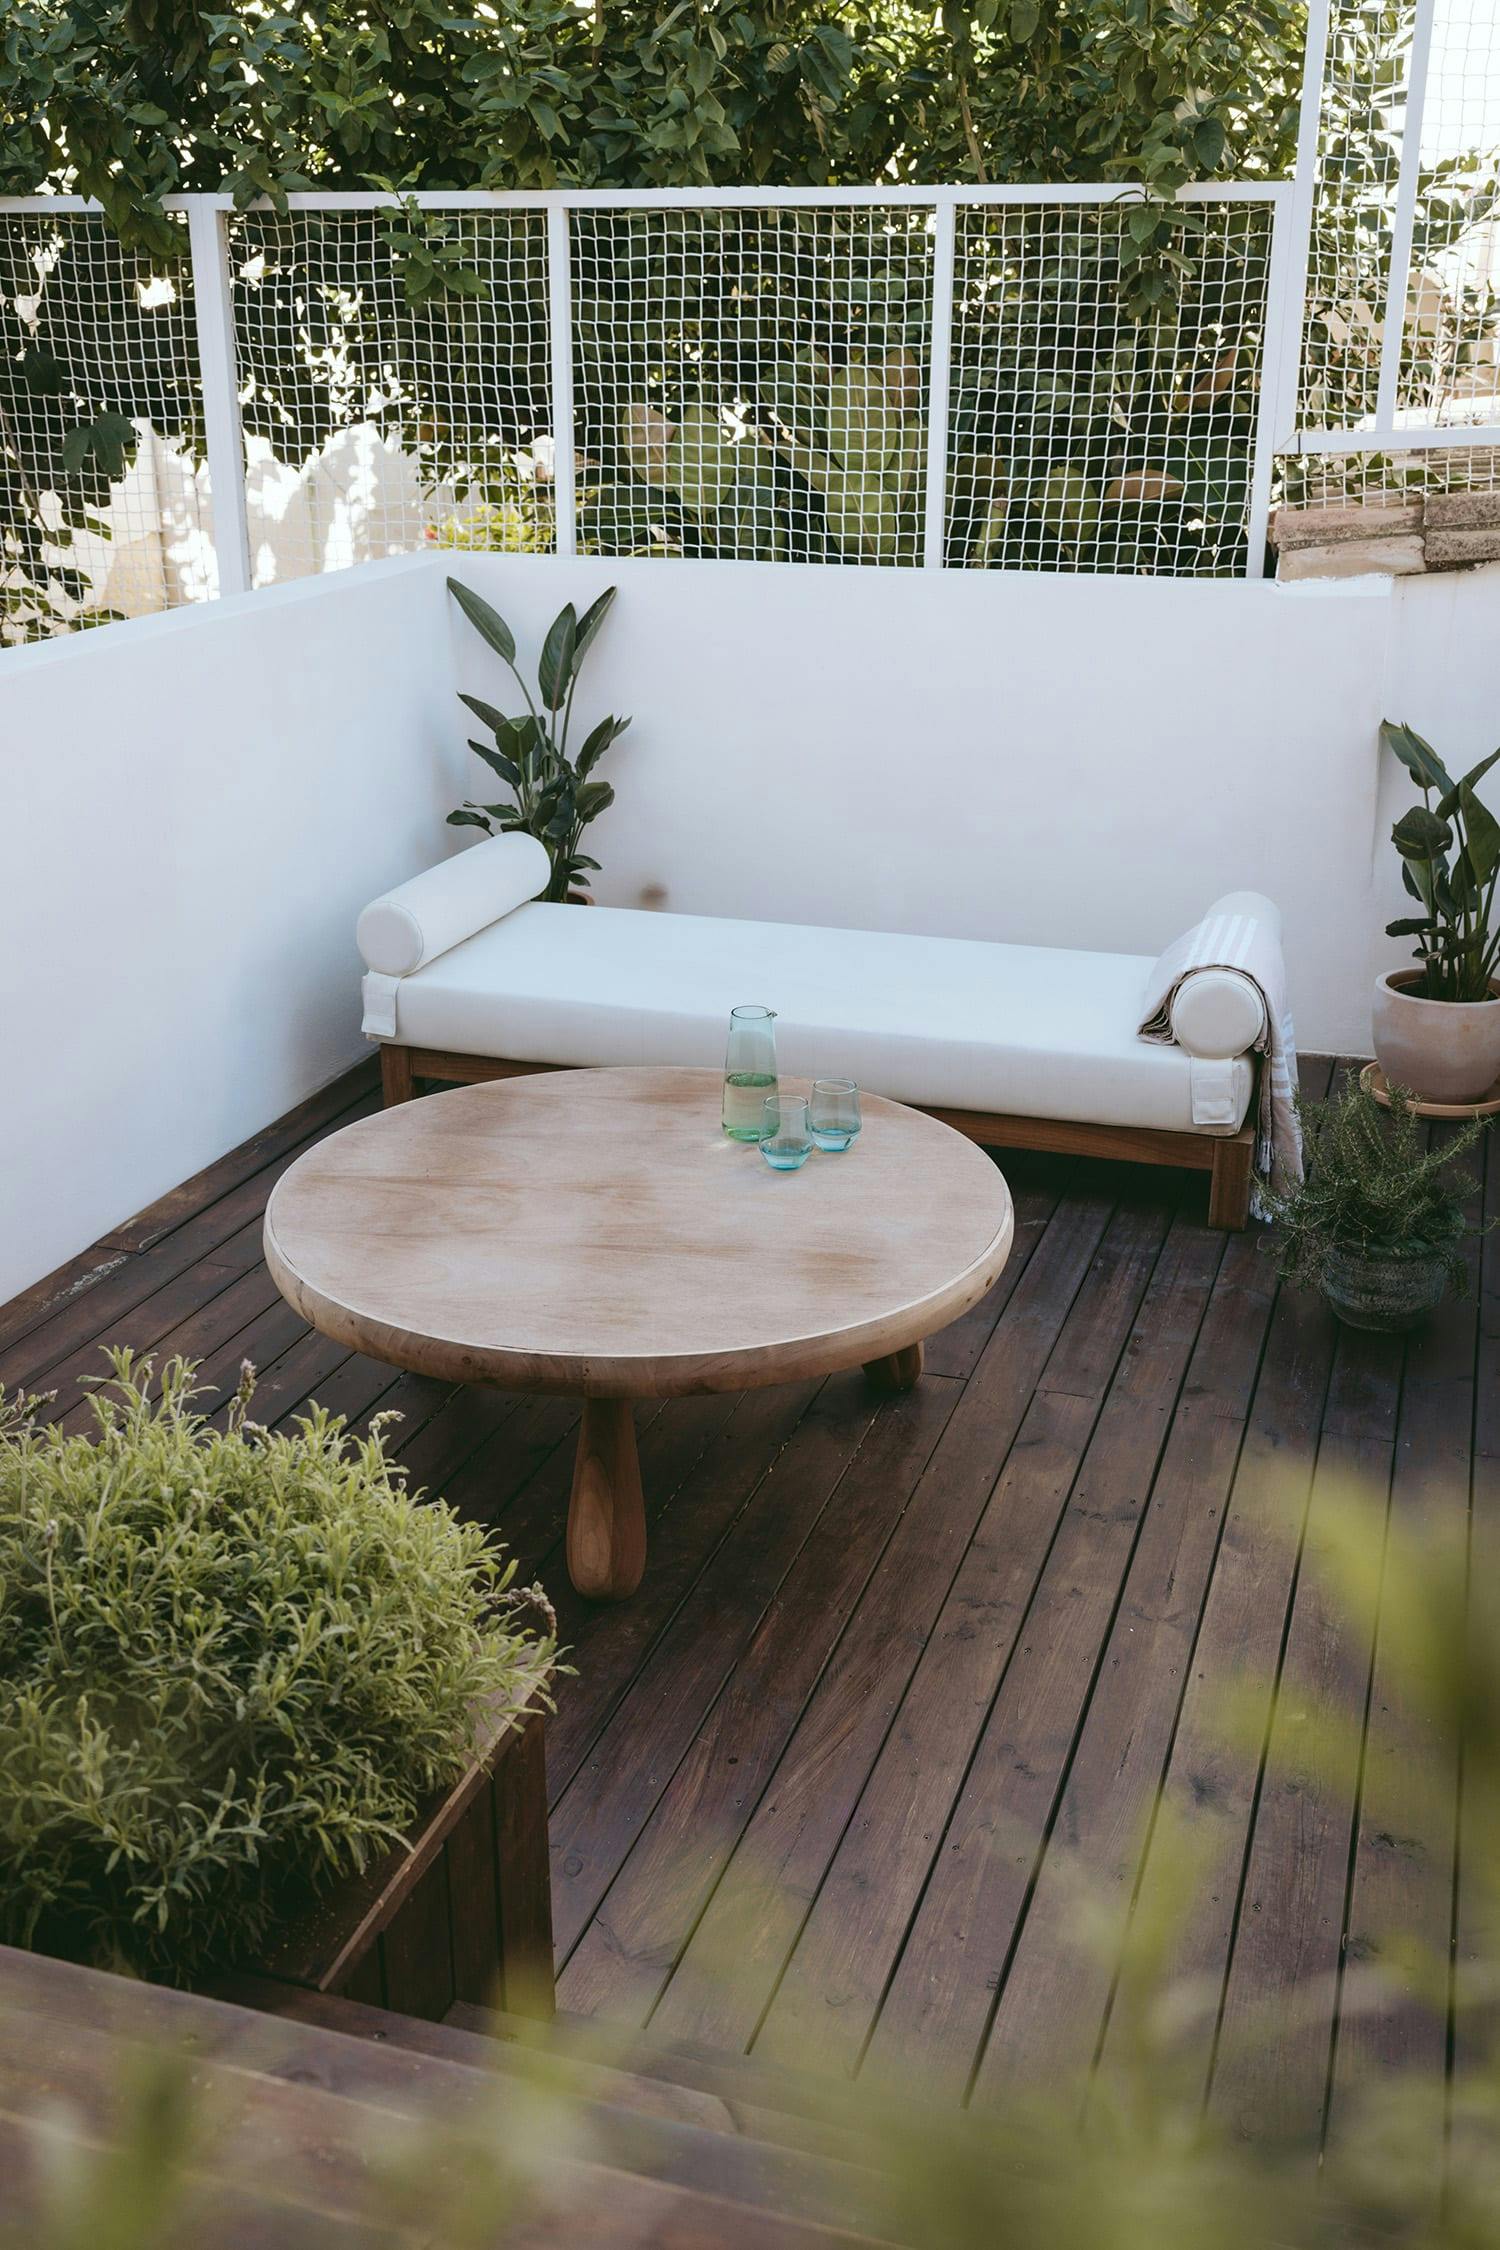 The image features a wooden deck with a white couch and a table, both placed on a wooden deck.